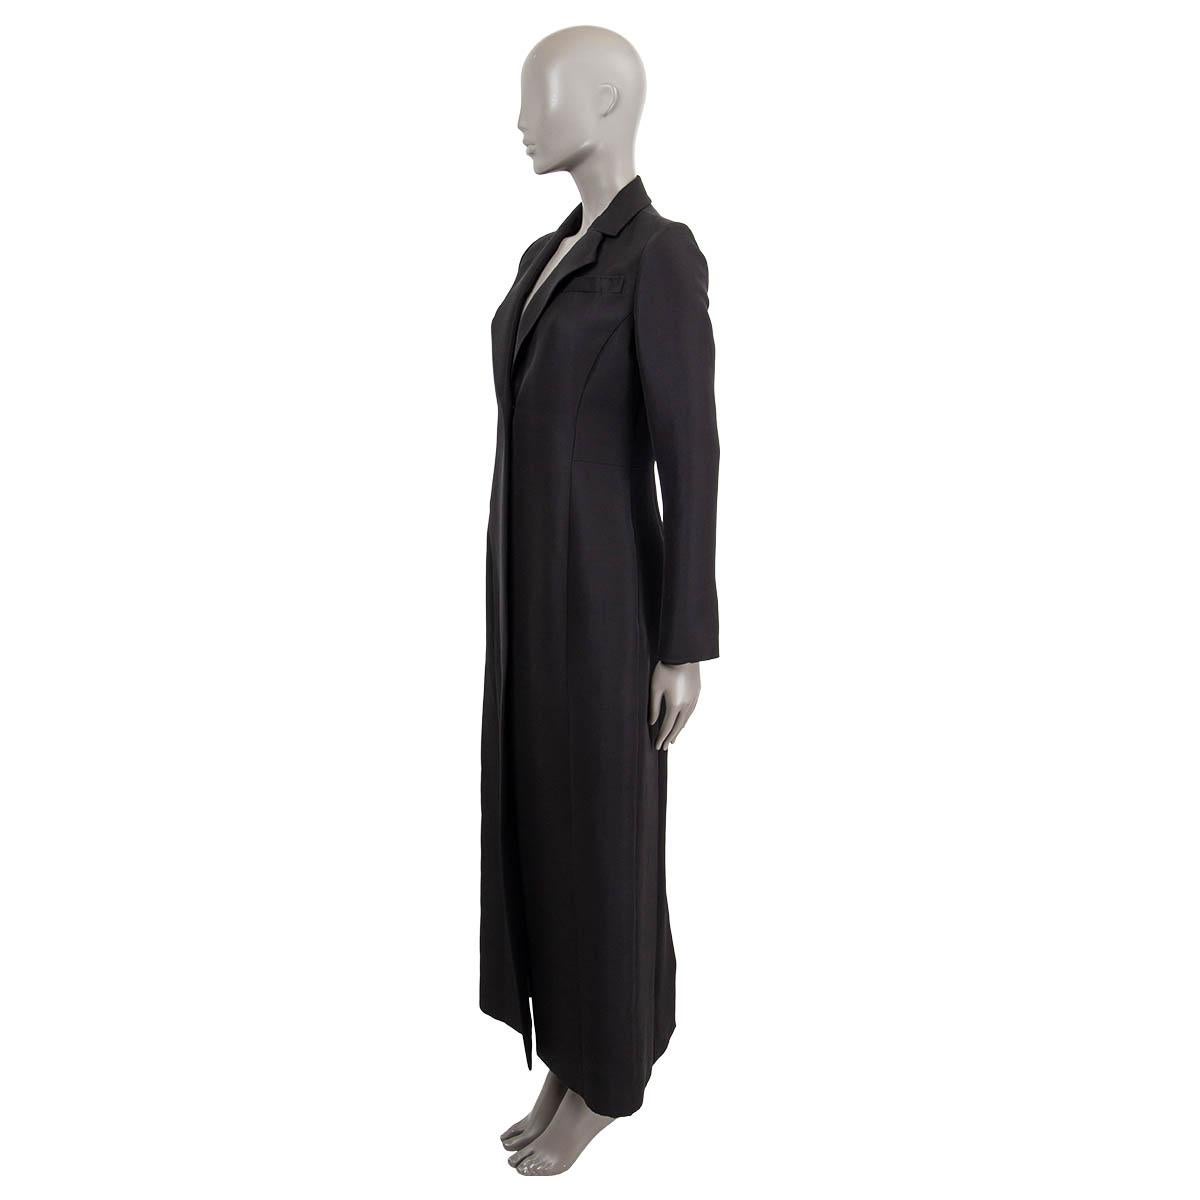 100% authentic Gabriela Hearst single-button long coat in black silk (58%) and cotton (42%). Features one breast pocket an buttons at the cuffs. Two invisible pockets on the side. Open with on button. Lined in silk (100%). Has been worn and is in